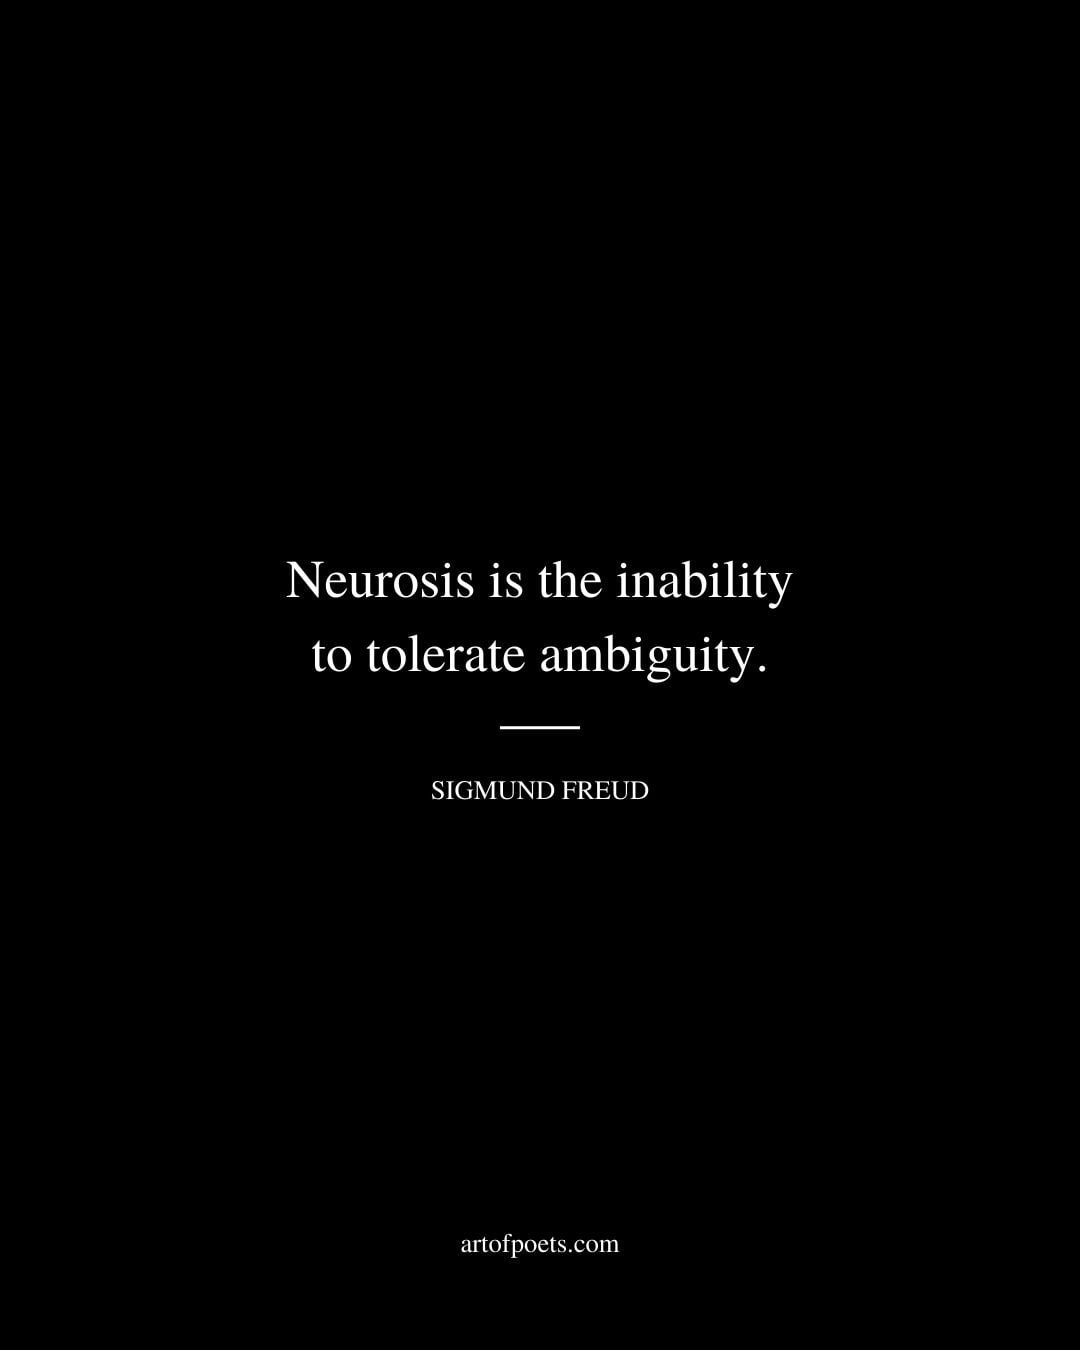 Neurosis is the inability to tolerate ambiguity